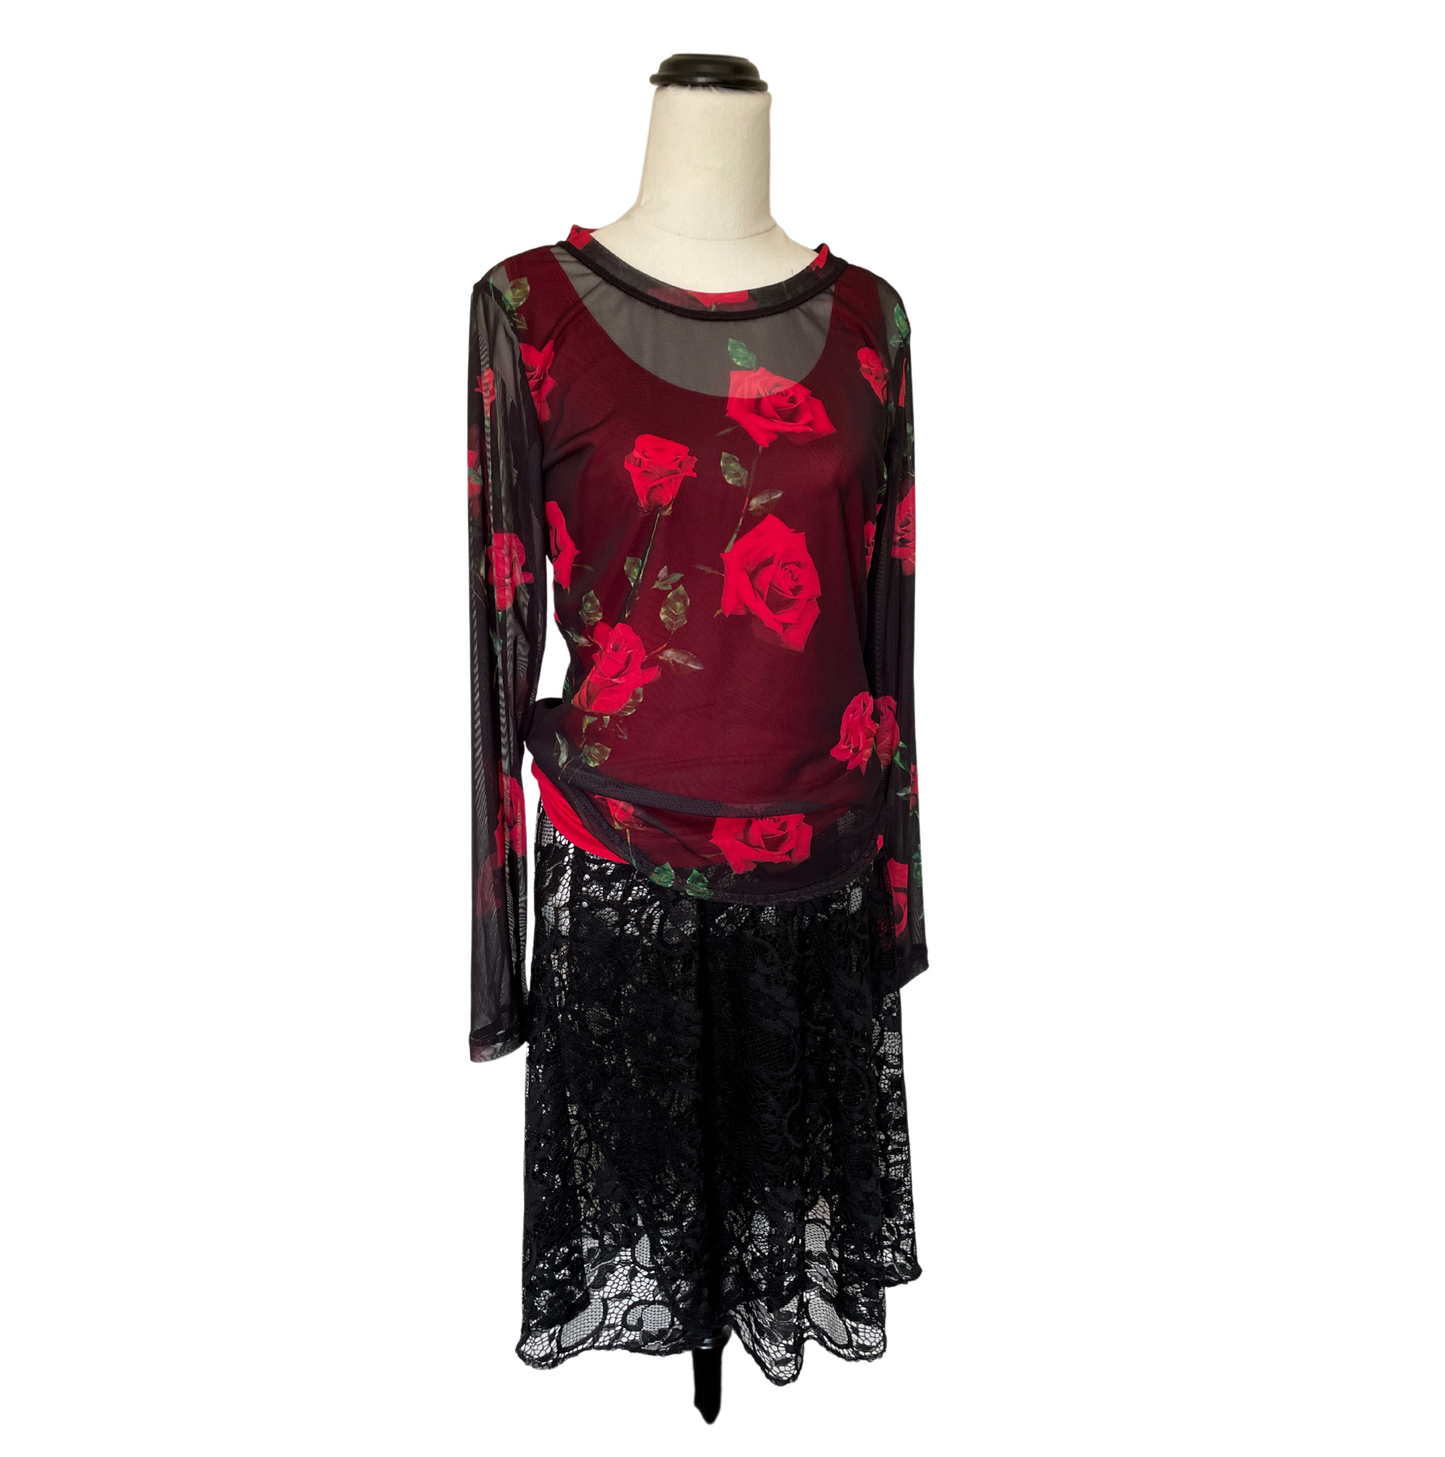 Mesh Stretch Long Sleeved Tee Red Roses